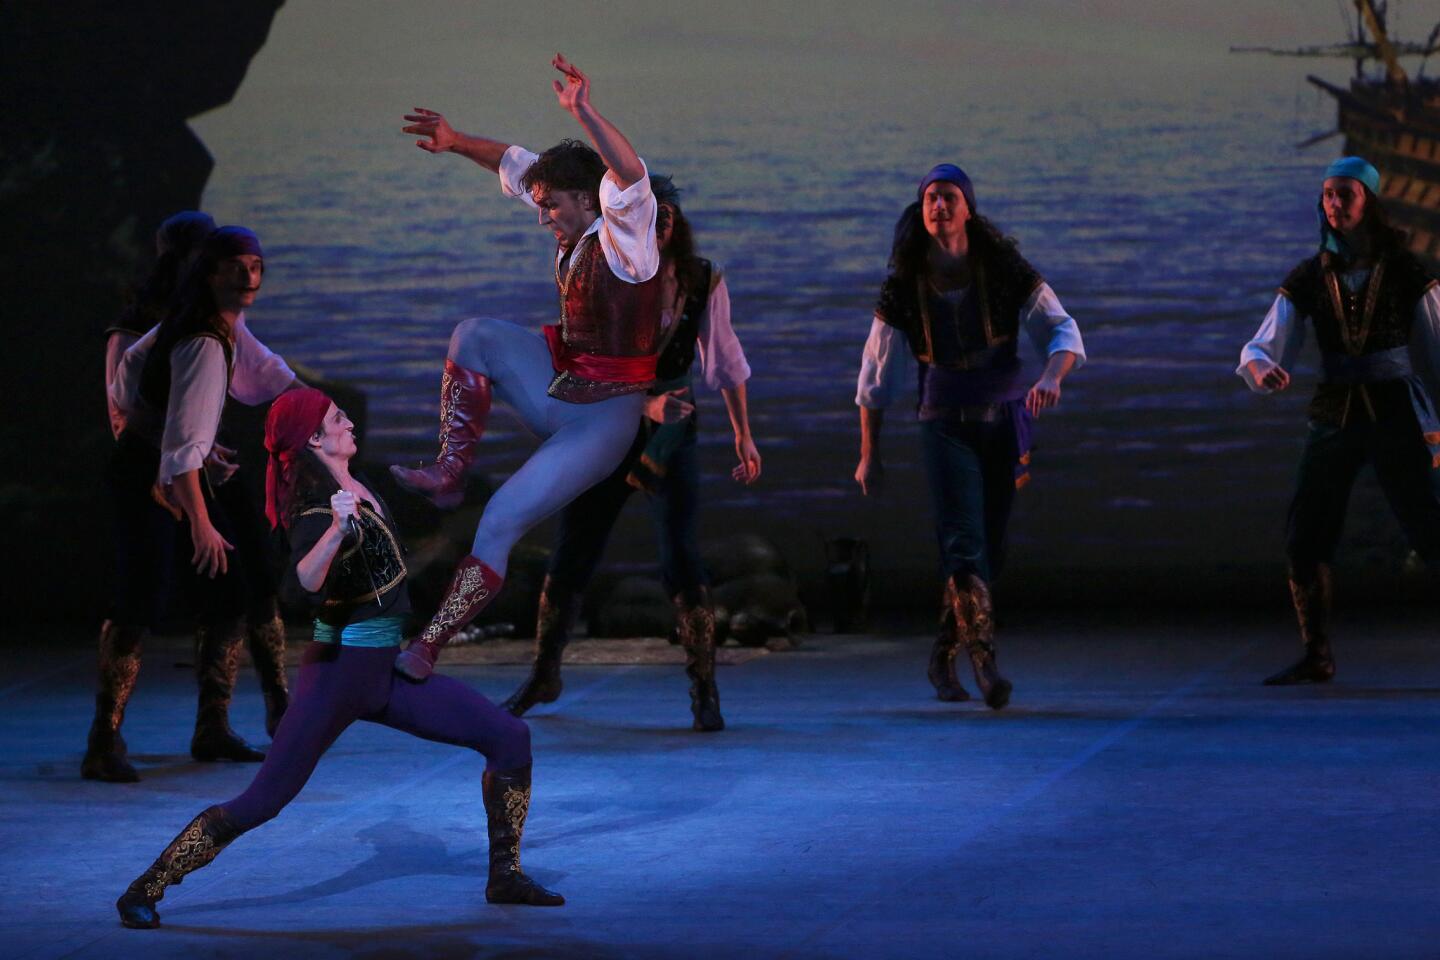 Alexander Omar, left, and Ivan Vasiliev of the Mikhailovsky Ballet performing "Le Corsaire" at Segerstrom Center for the Arts.